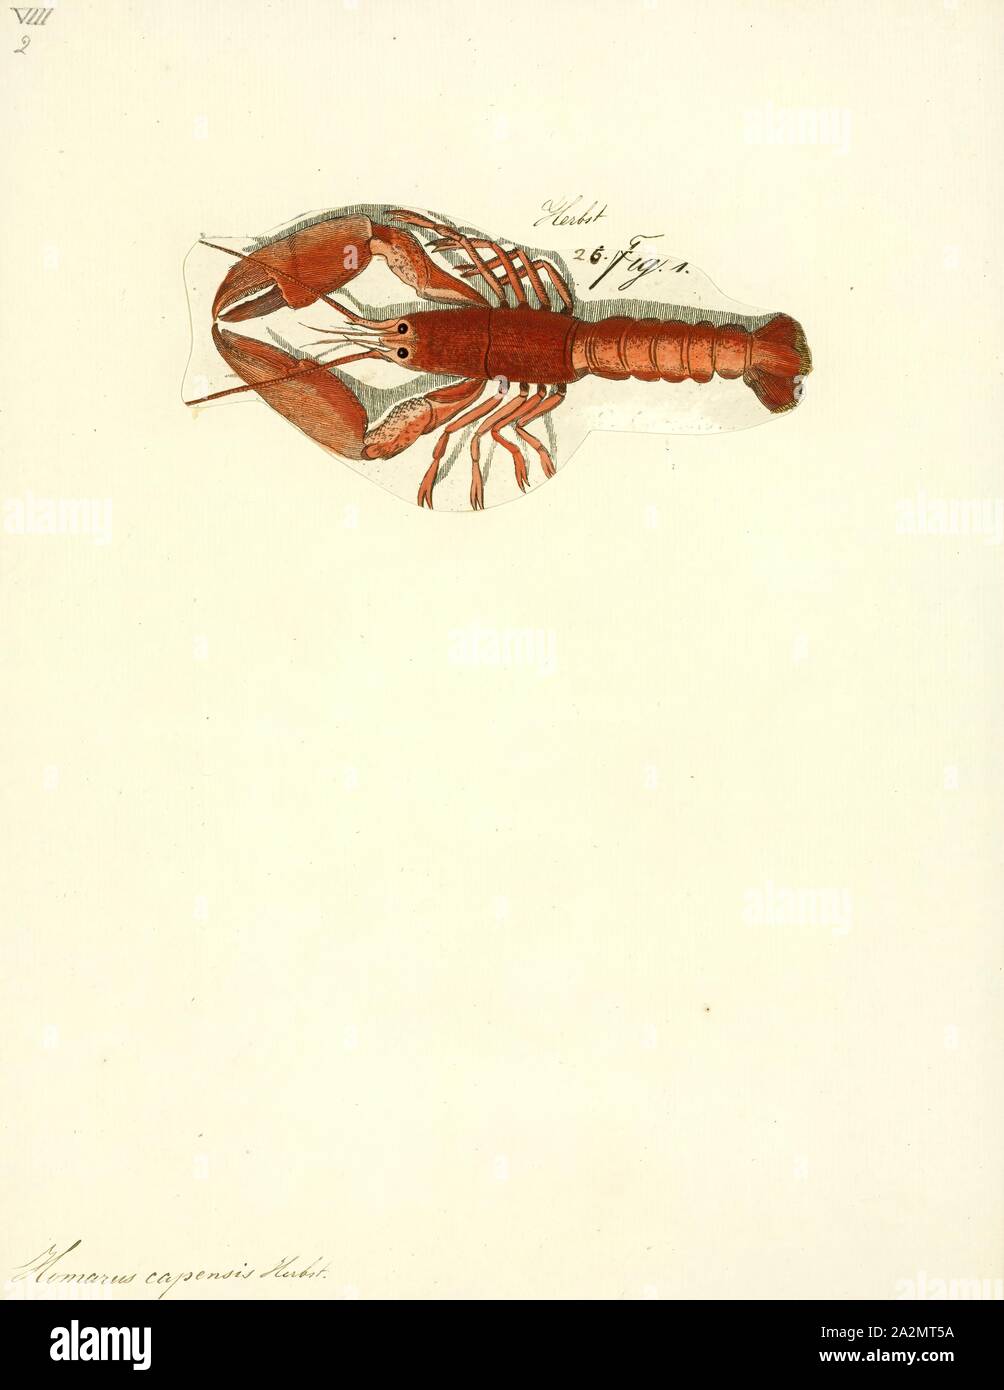 Homarus capensis, Print, The Cape lobster, Homarinus capensis, is a species of small lobster that lives off the coast of South Africa, from Dassen Island to Haga Haga. Only a few dozen specimens are known, mostly regurgitated by reef-dwelling fish. It lives in rocky reefs, and is thought to lay large eggs that have a short larval phase, or that hatch directly as a juvenile. The species grows to a total length of 10 cm (3.9 in), and resembles a small European or American lobster; it was previously included in the same genus, Homarus, although it is not very closely related to those species, and Stock Photo